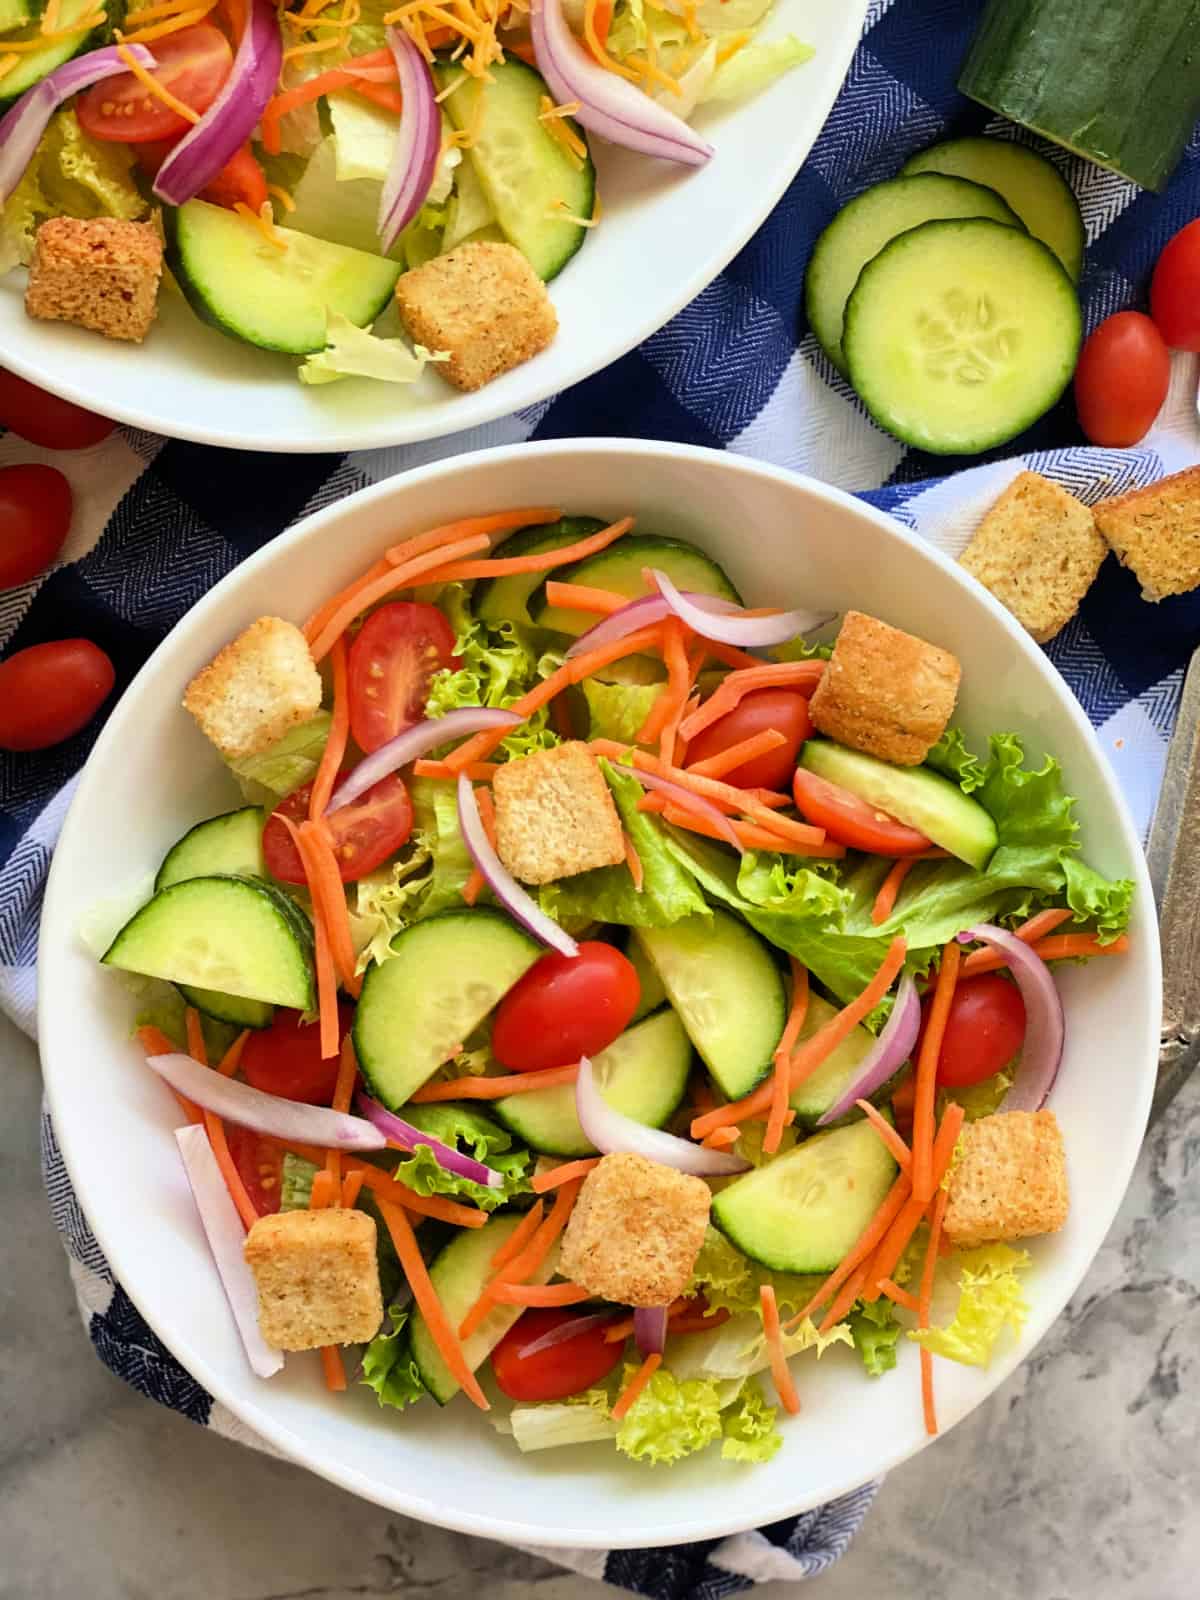 Two white bowls filled with salad with tomatoes, cucumber, shredded carrots, and croutons.